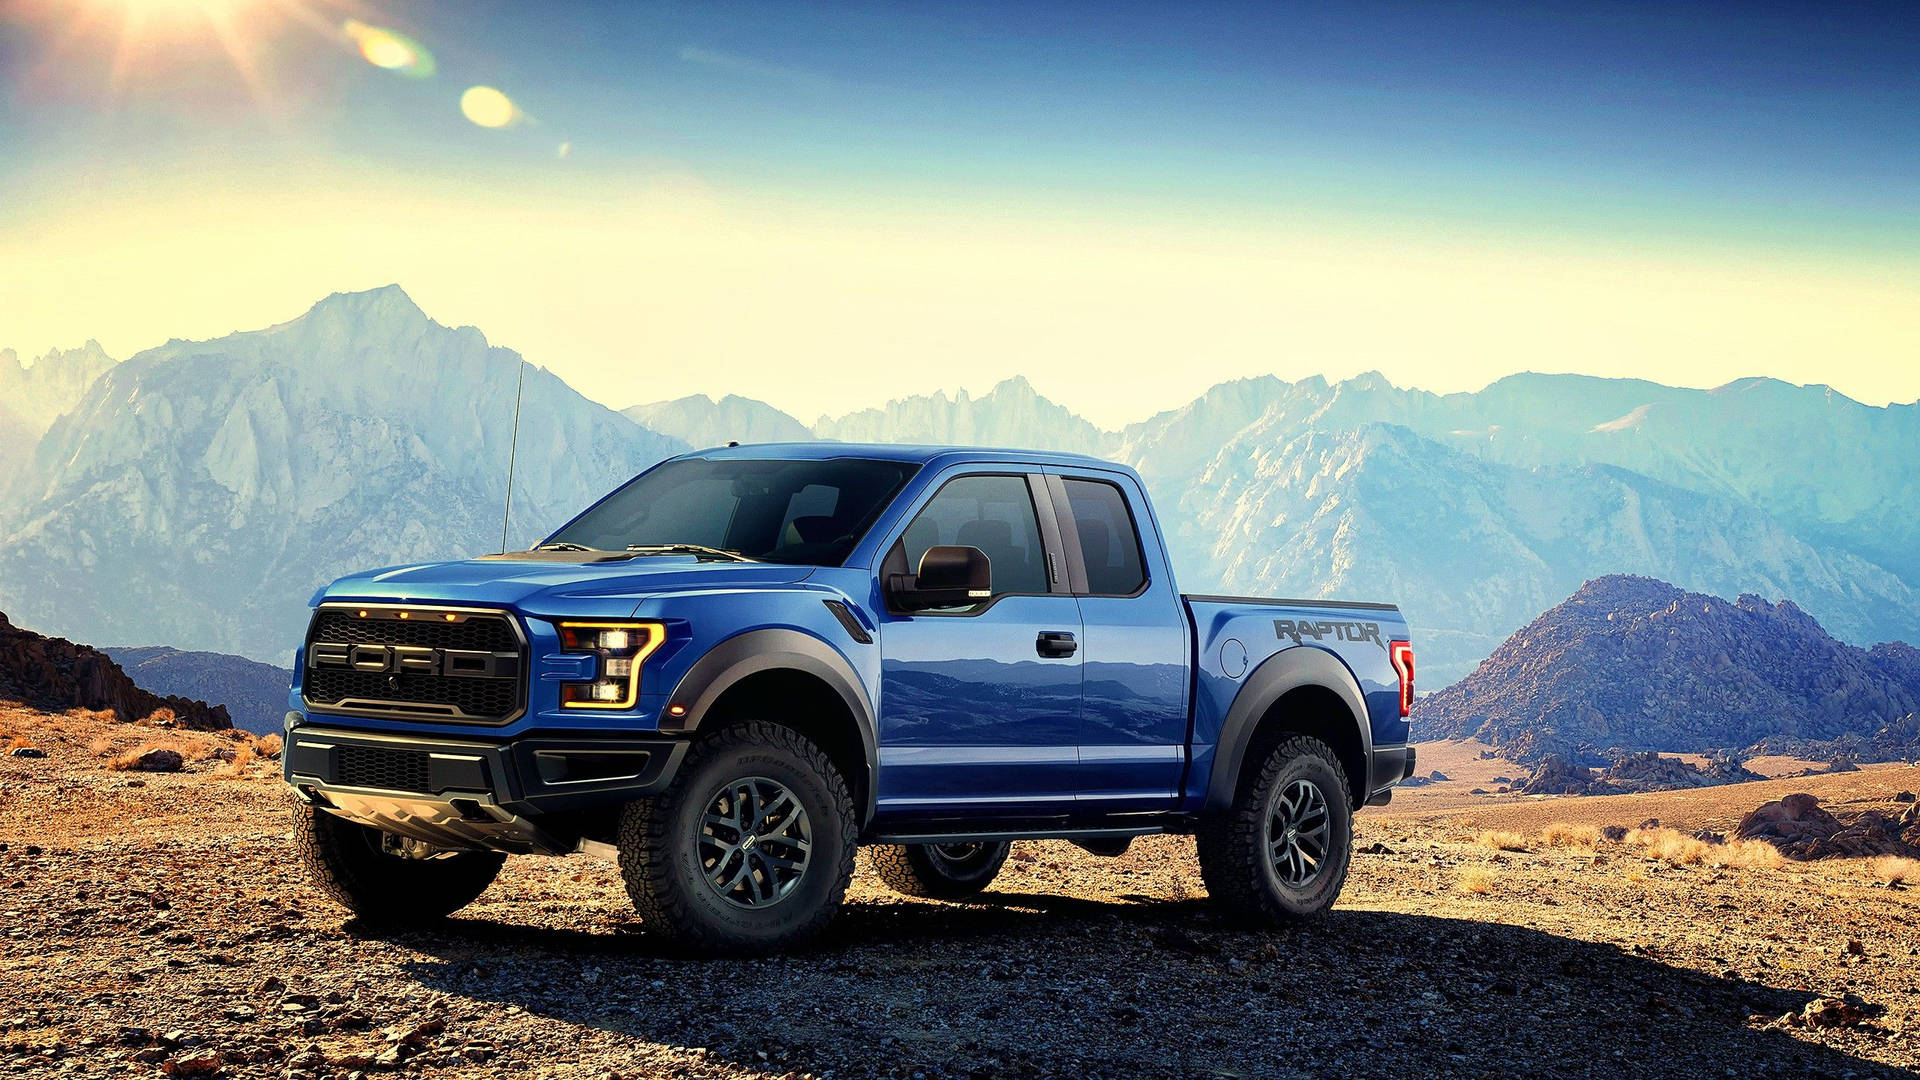 Ford Raptor With View Of Mountains